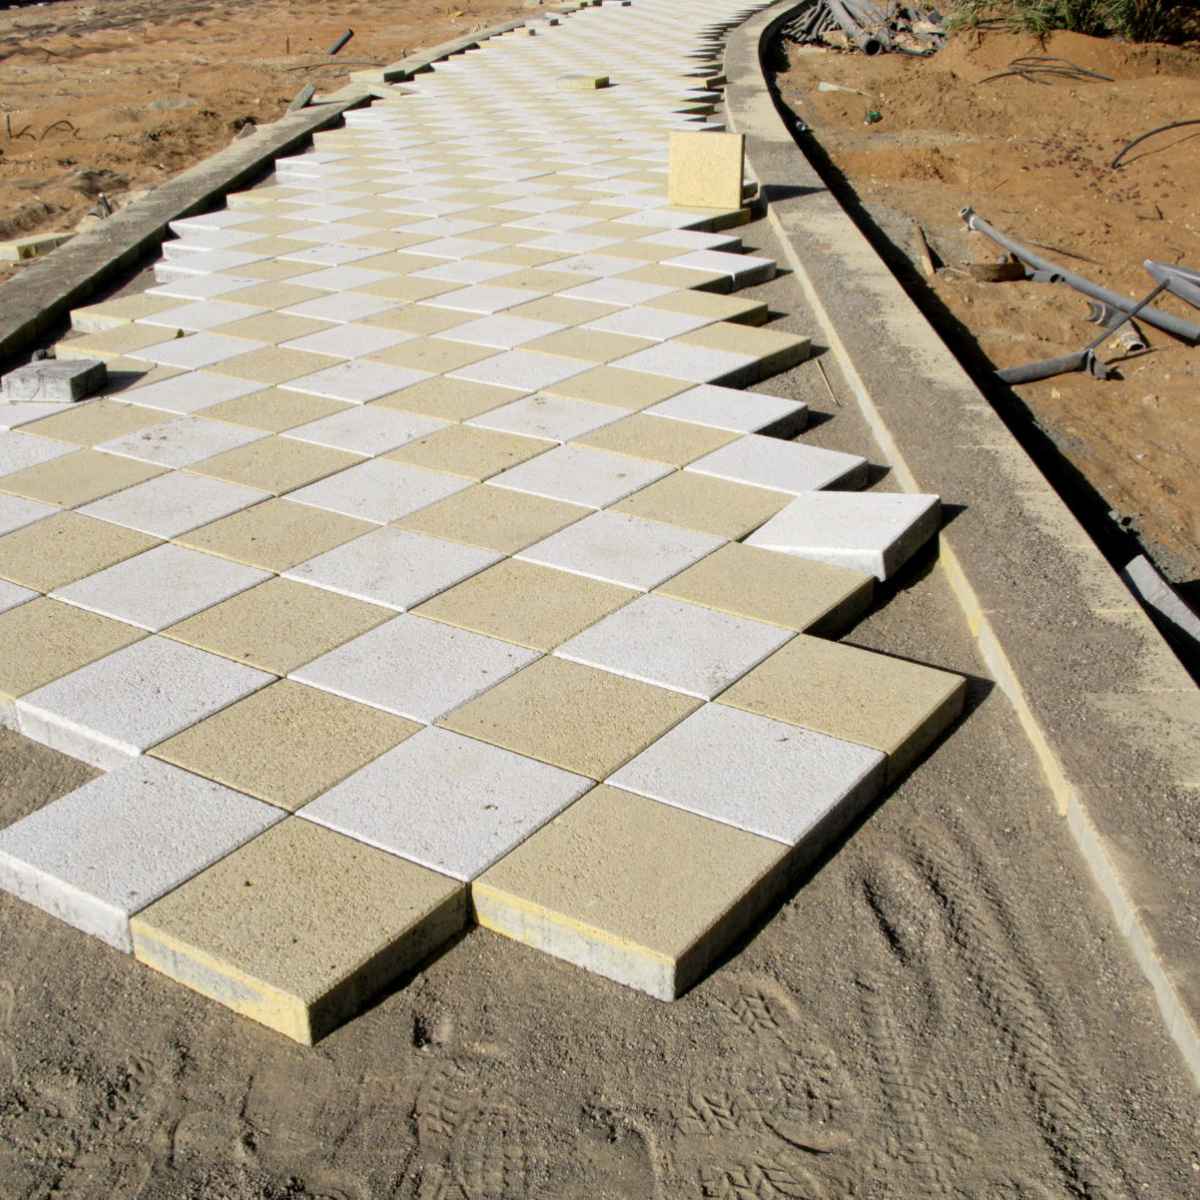 How To Lay Paving Slabs On Sand (Guide)